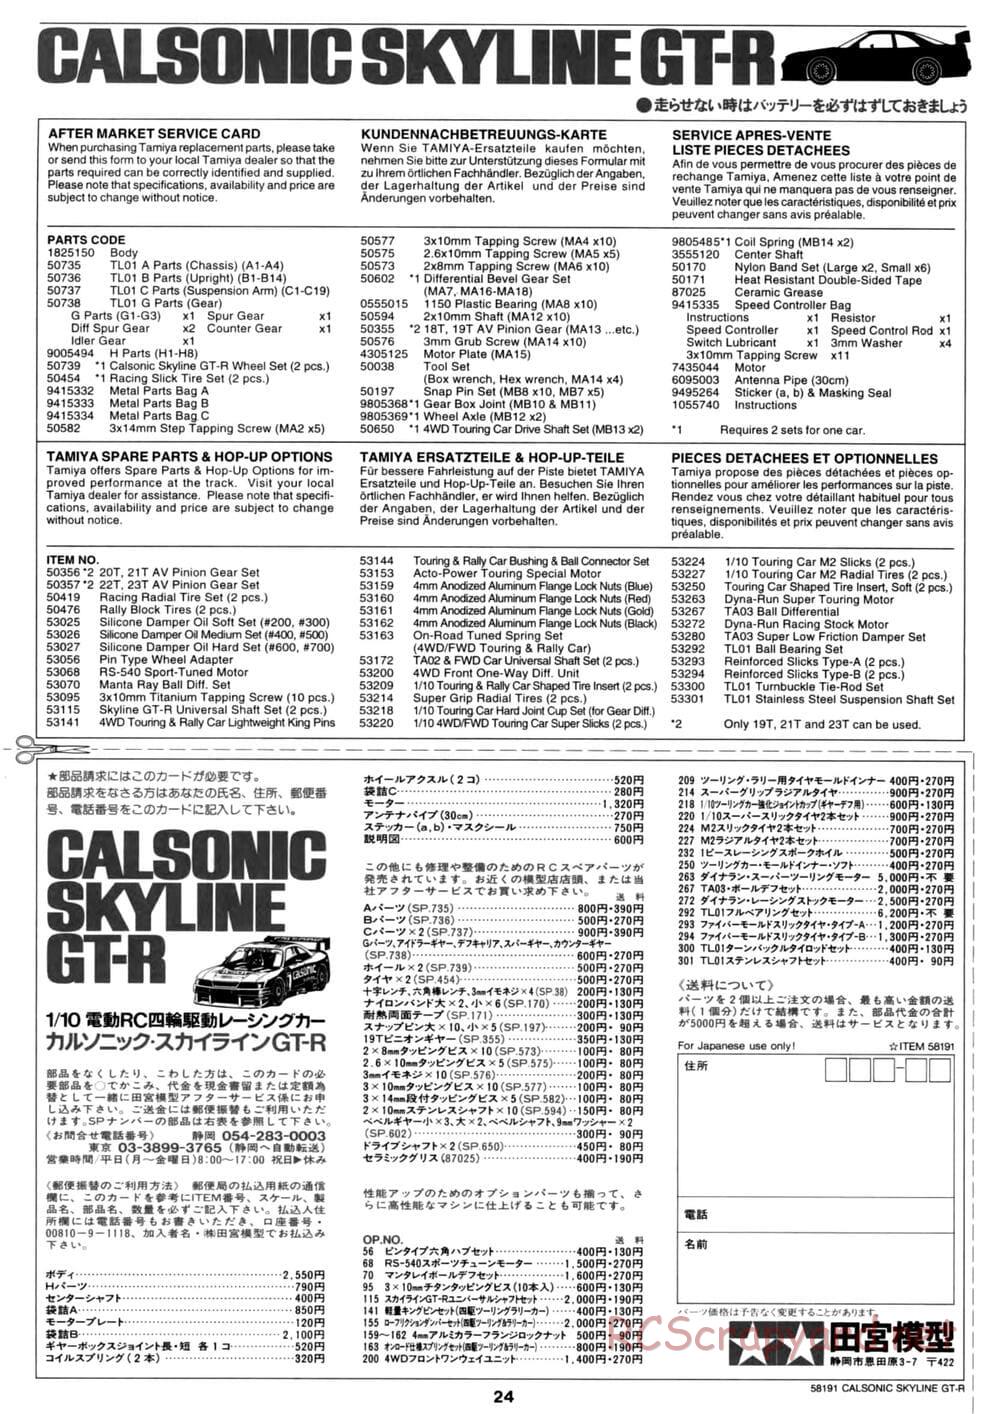 Tamiya - Calsonic Skyline GT-R - TL-01 Chassis - Manual - Page 24